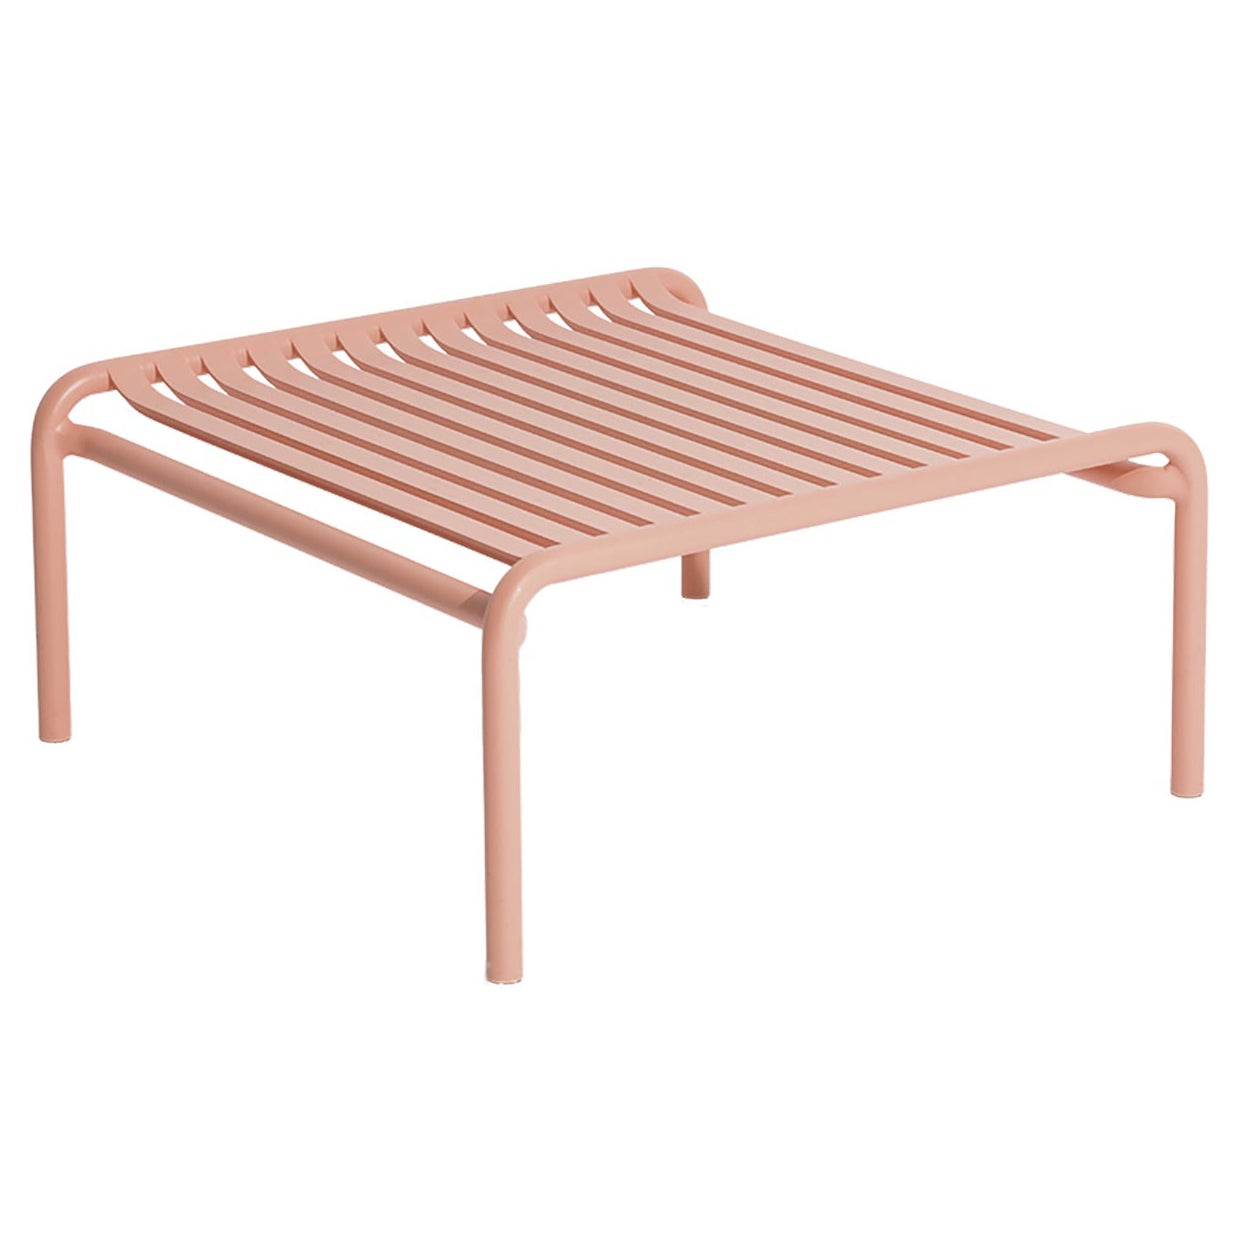 Petite Friture Week-End Coffee Table in Blush Aluminium by Studio BrichetZiegler For Sale